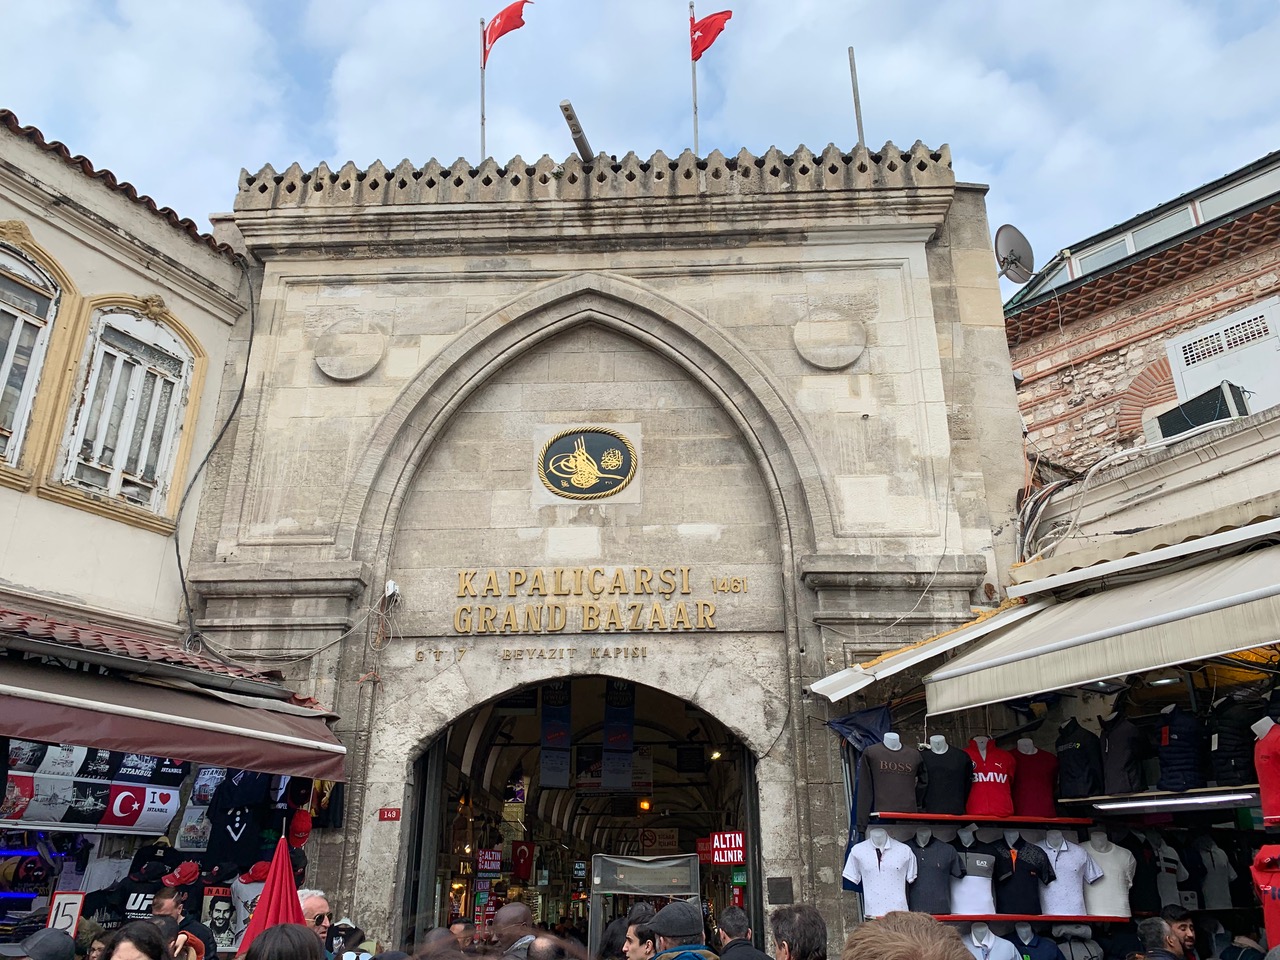 The arched entrance to the Grand Bazaar